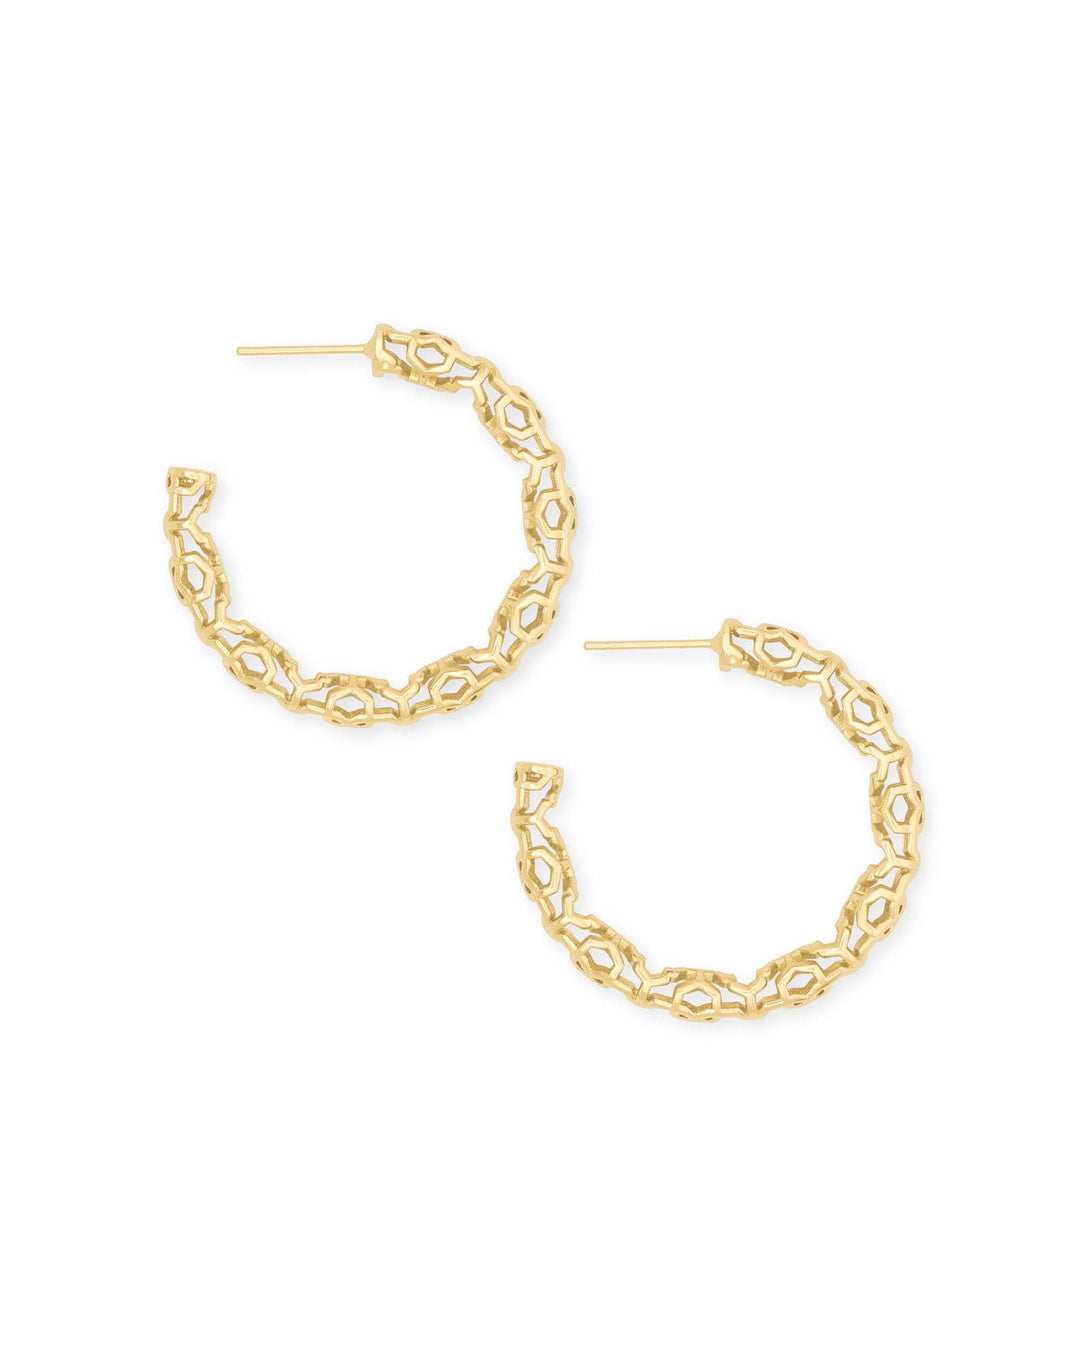 Maggie Small Hoop Earrings in Gold Filigree - Bliss Boutique 